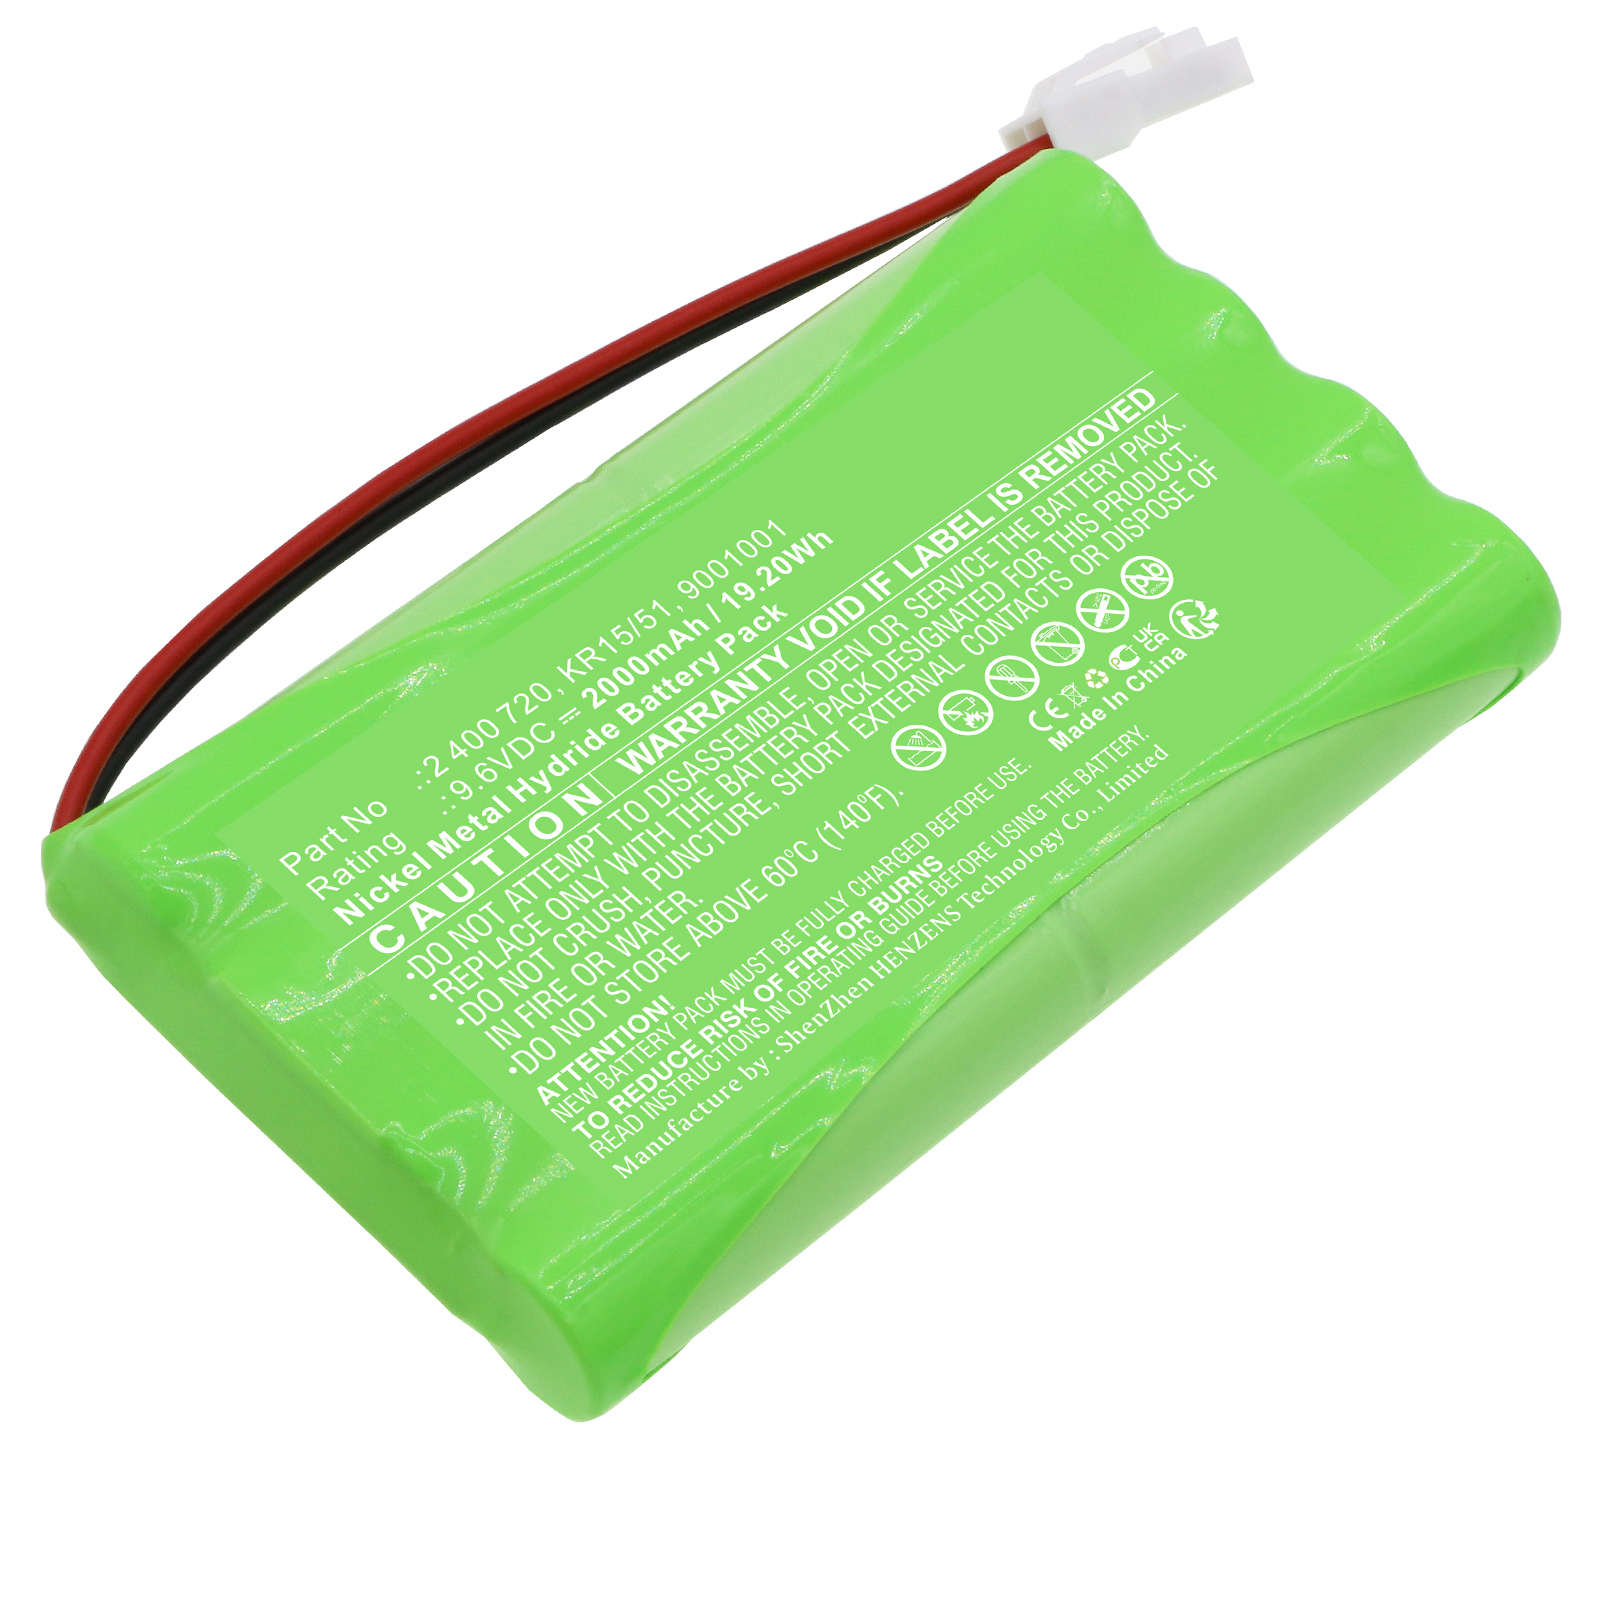 Synergy Digital Smart Home Battery, Compatible with BOSCH 2 400 720 Smart Home Battery (Ni-MH, 9.6V, 2000mAh)